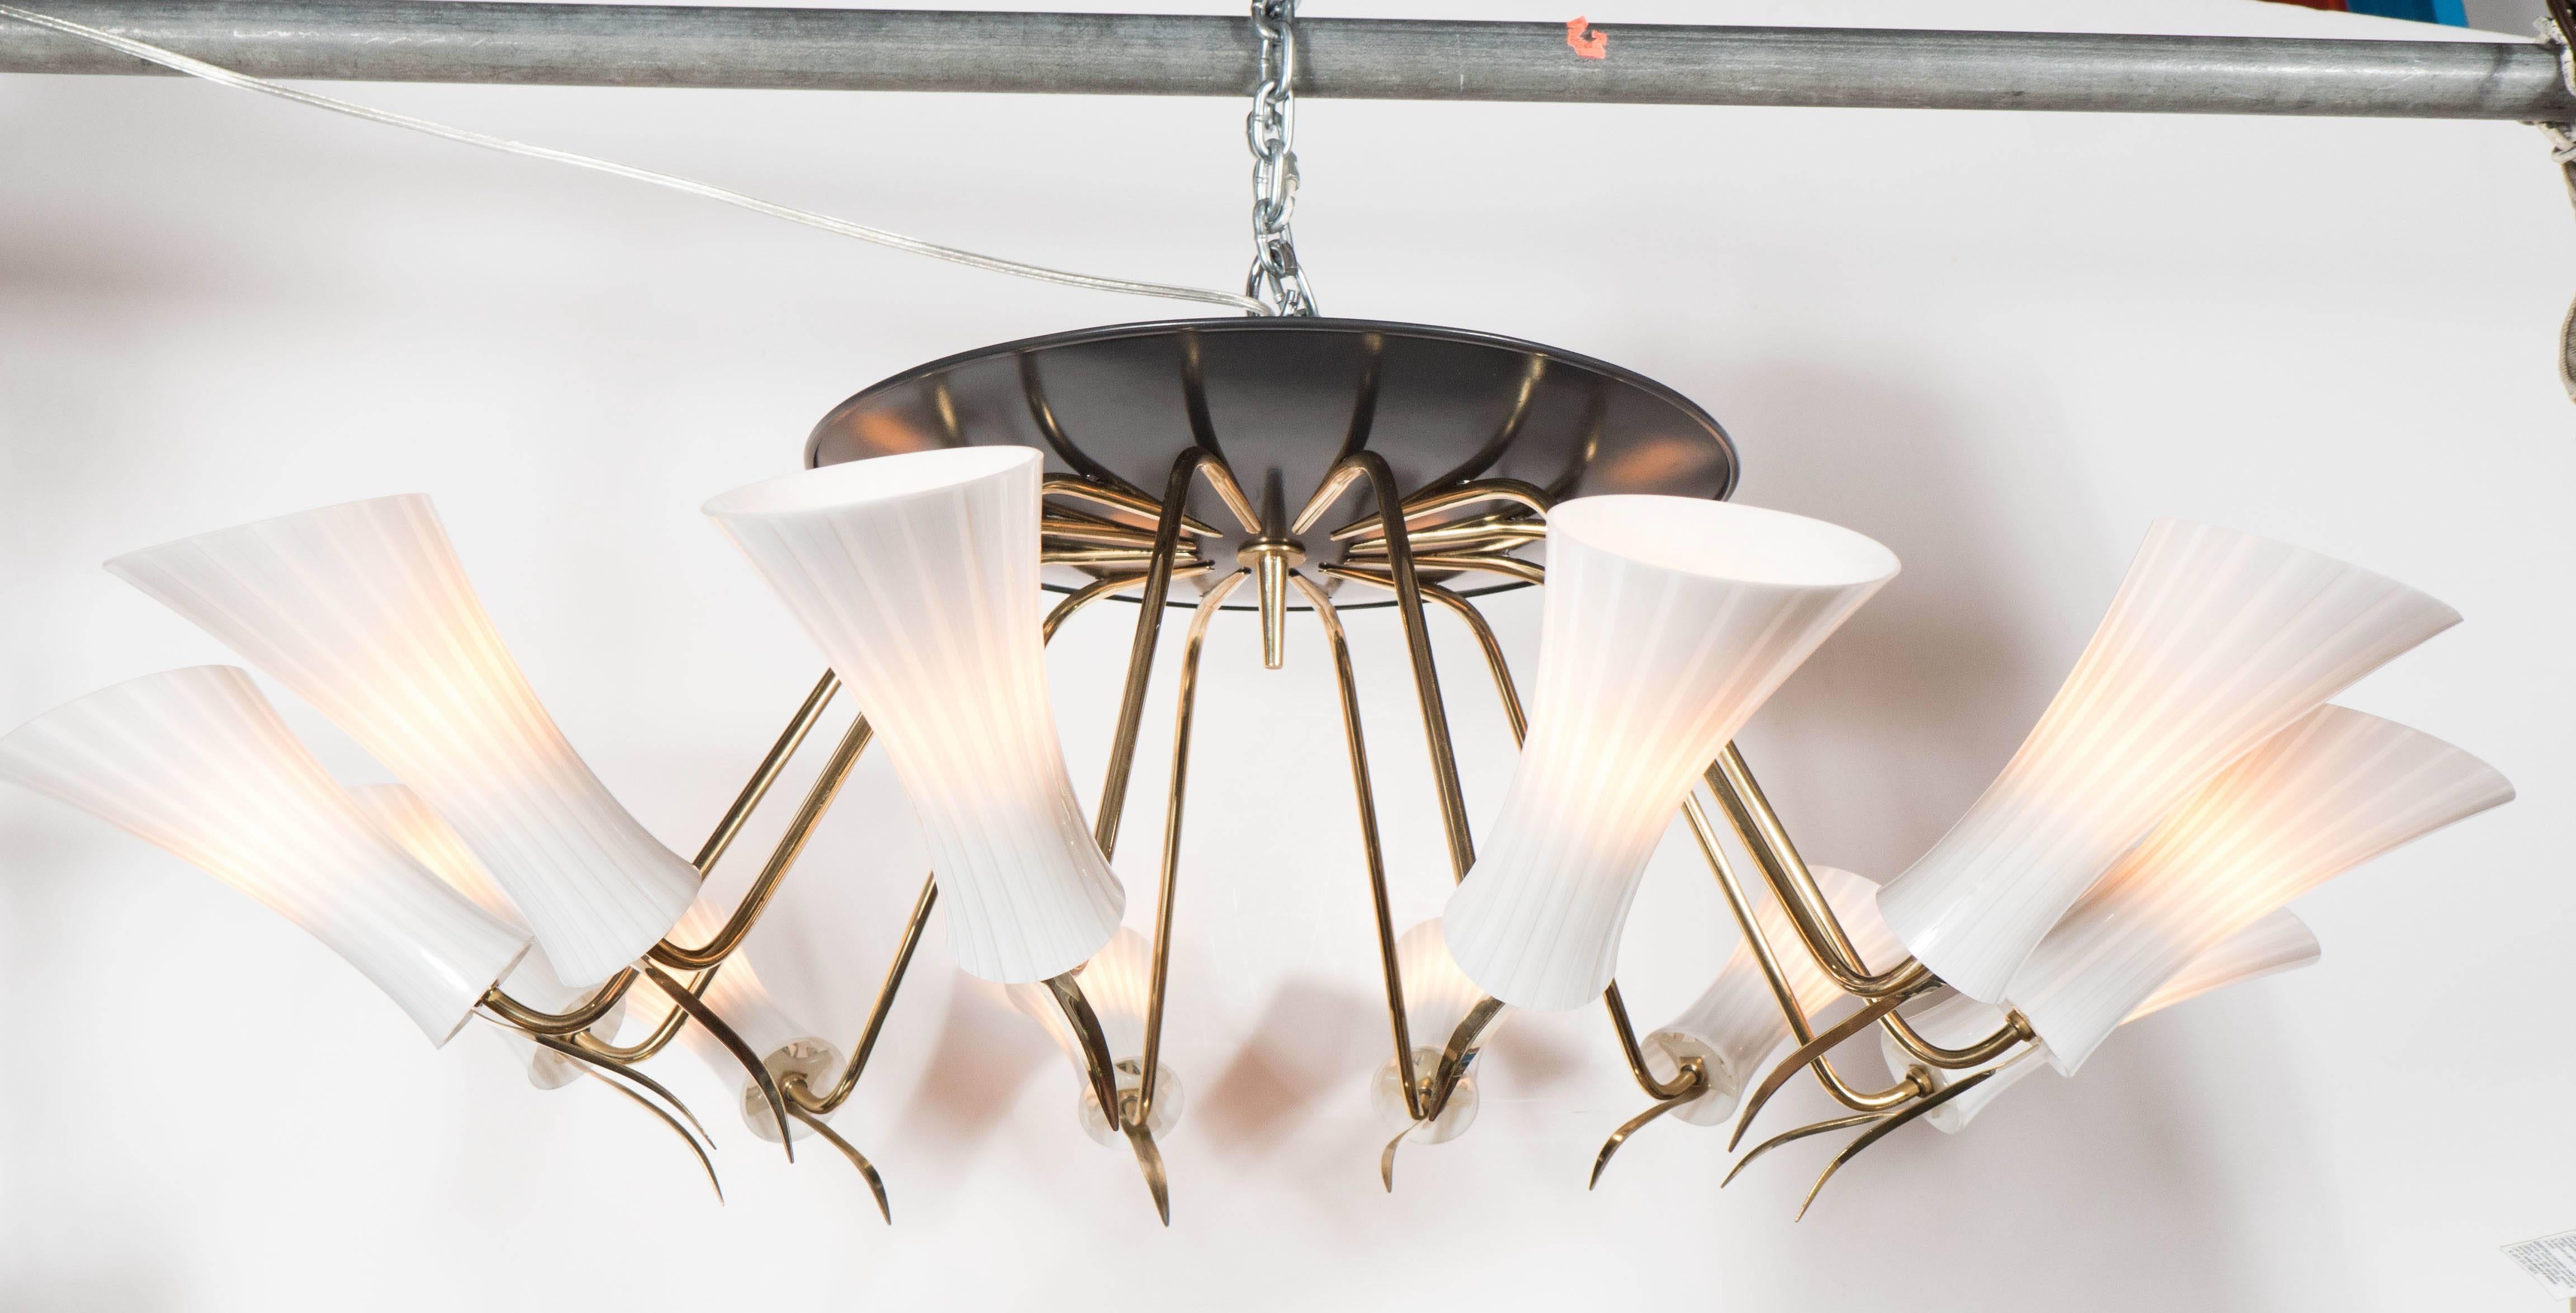 A beautiful Mid-Century Modernist chandelier in the manner of Stilnovo featuring a black enameled base which supports twelve extension arms of polished brass arms each supporting a handblown Murano glass shade with linear striations. The detailing